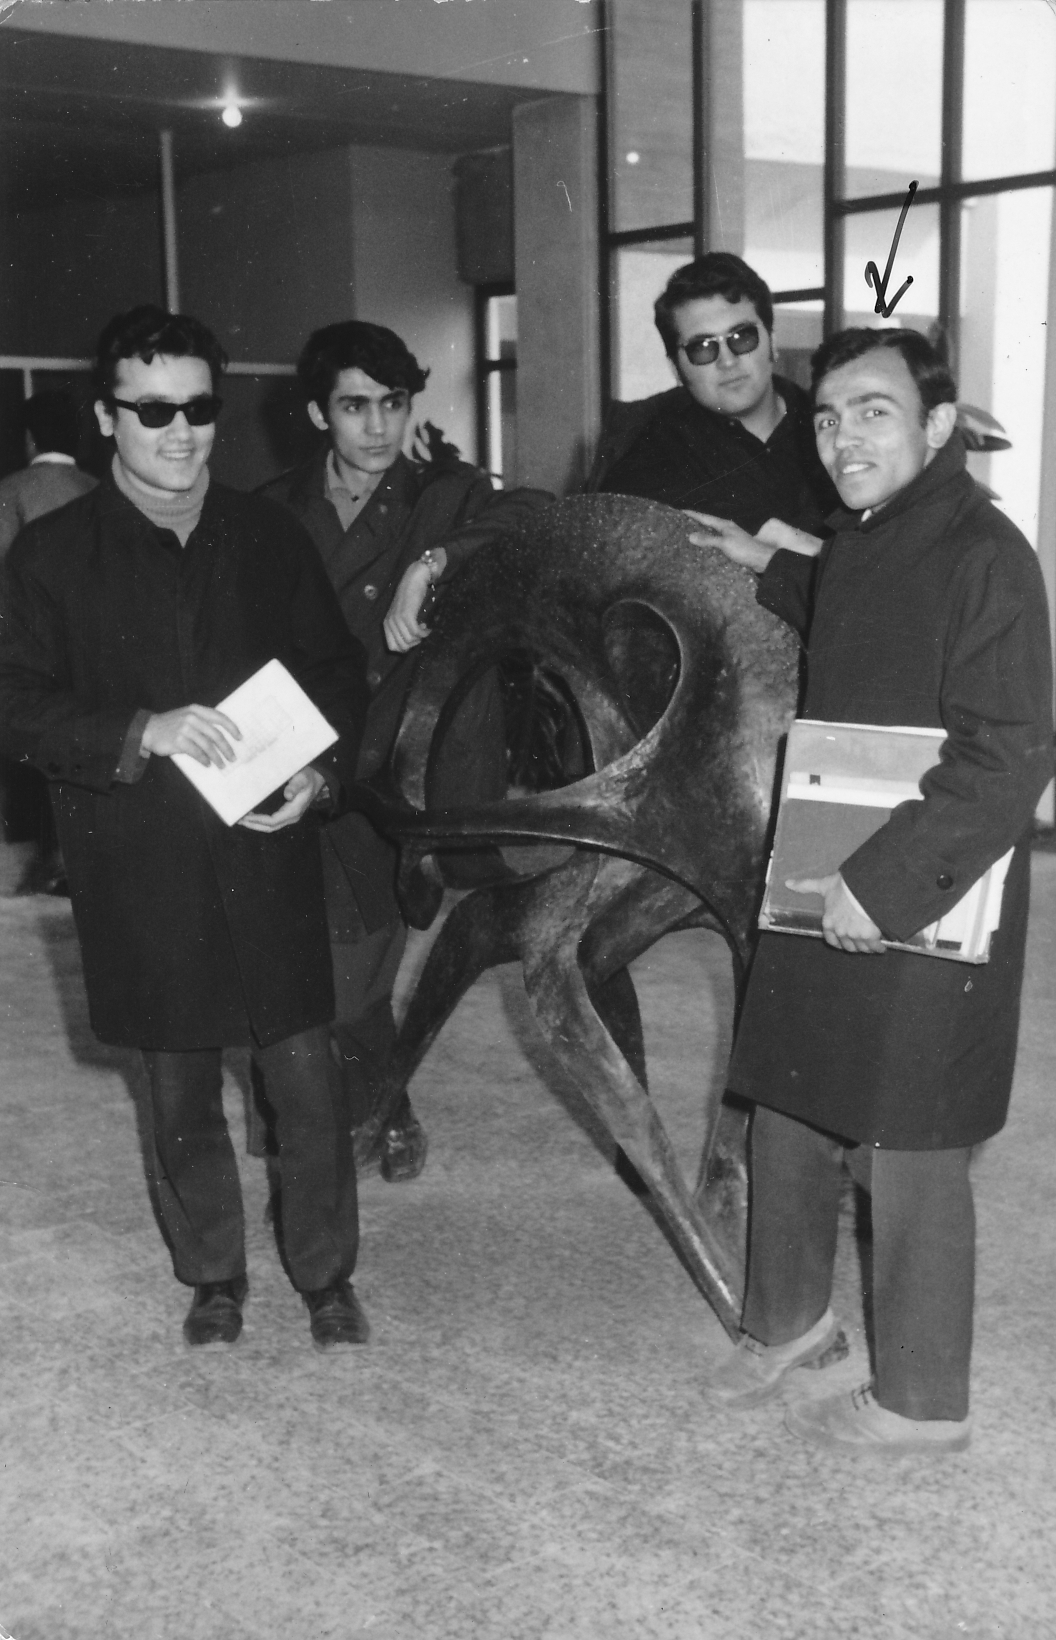 Students pose in front of the abstract deer sculpture in the library (1966)